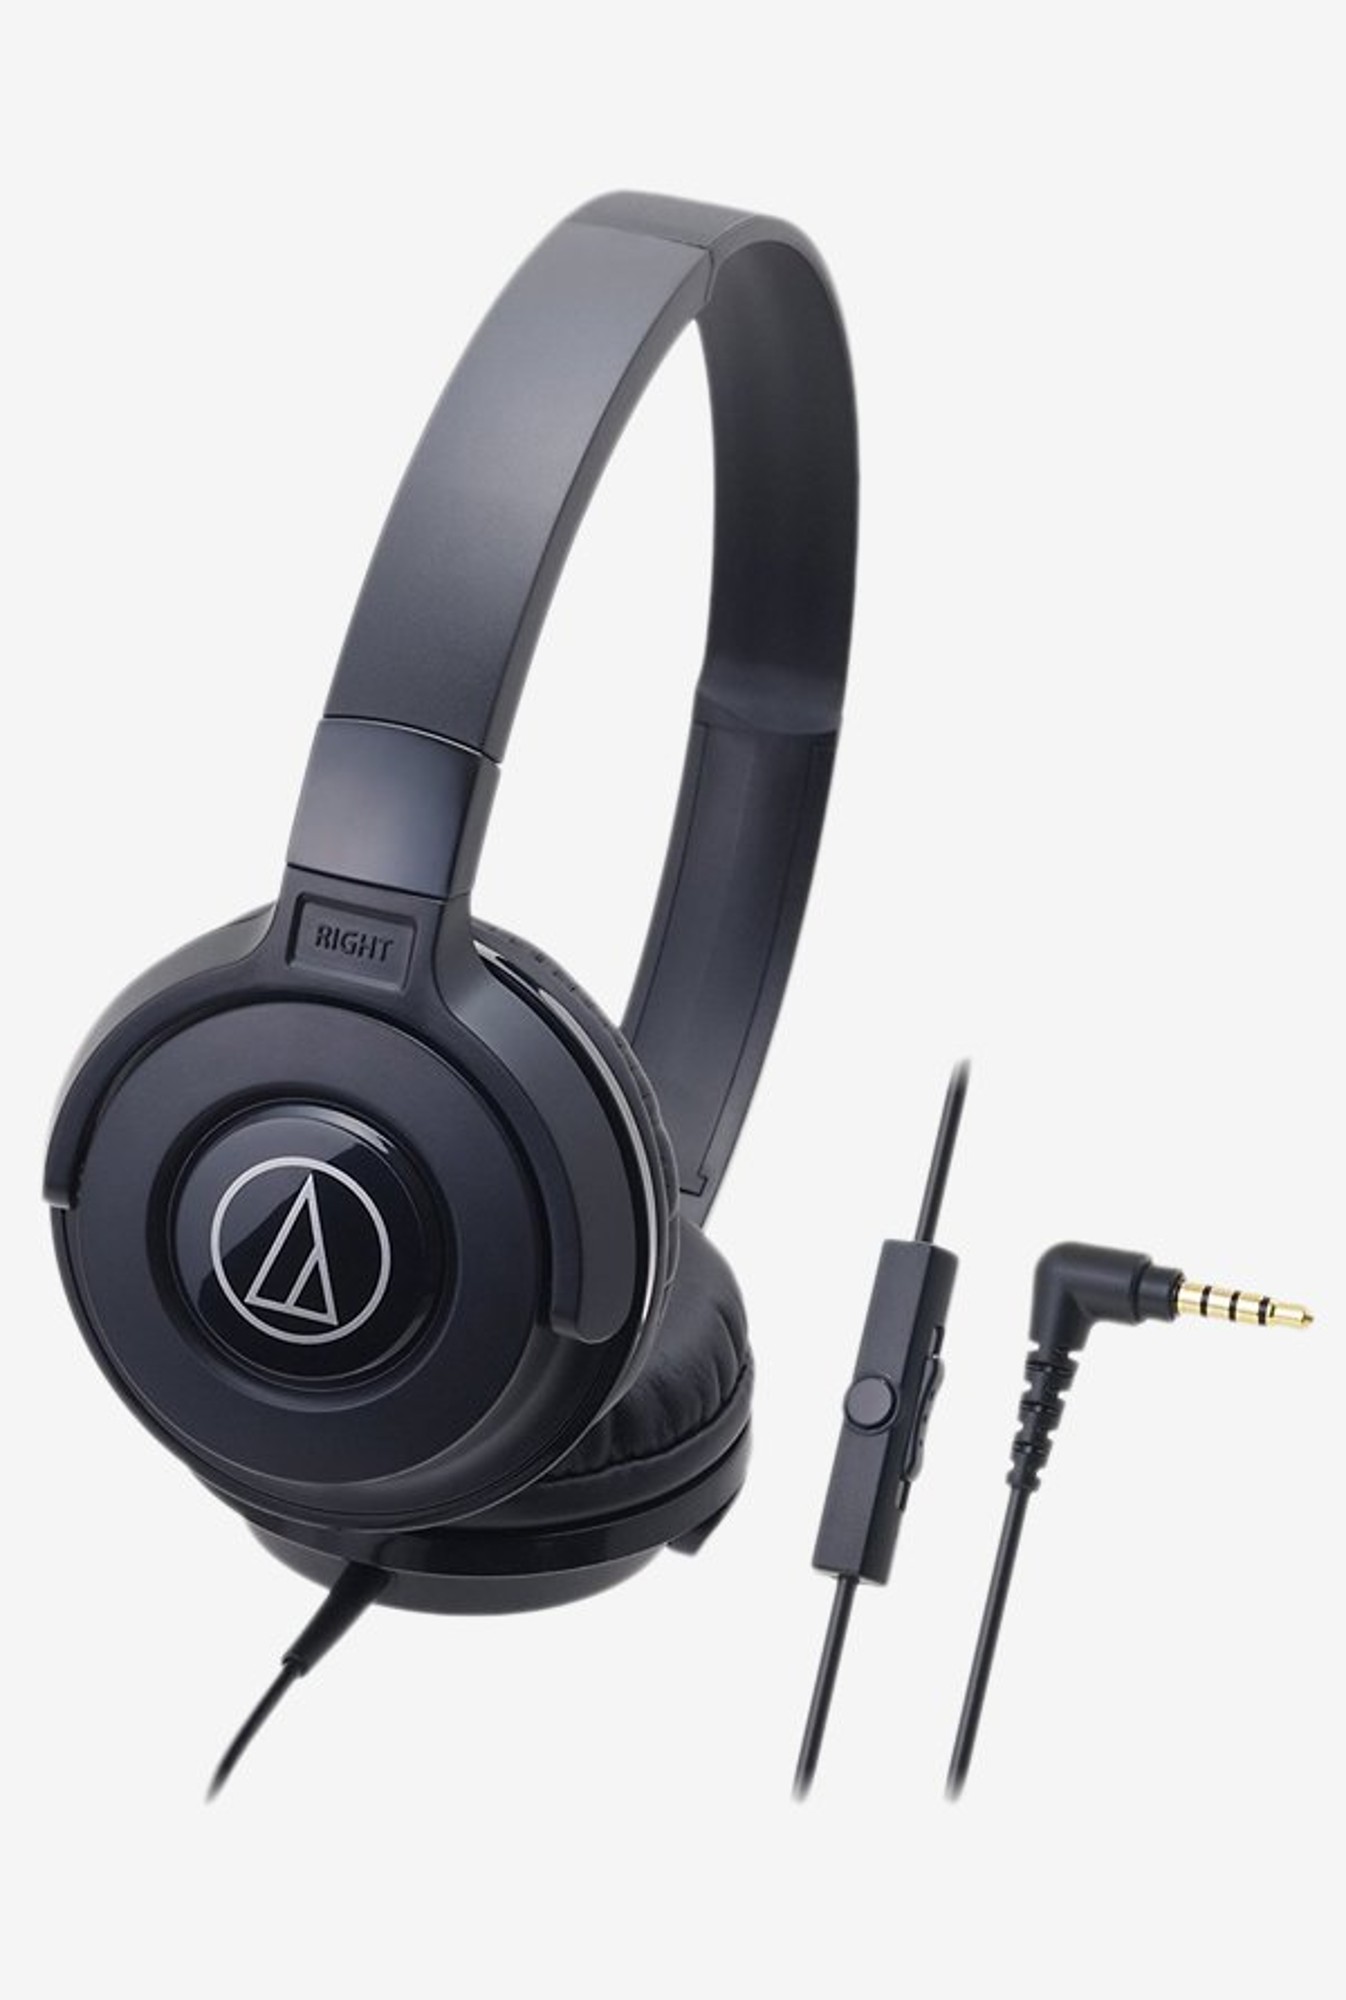 For 597/-(70% Off) Audio-Technica ATH-S100IS On the Ear Earphones with Mic (Black) at TATA CLiQ